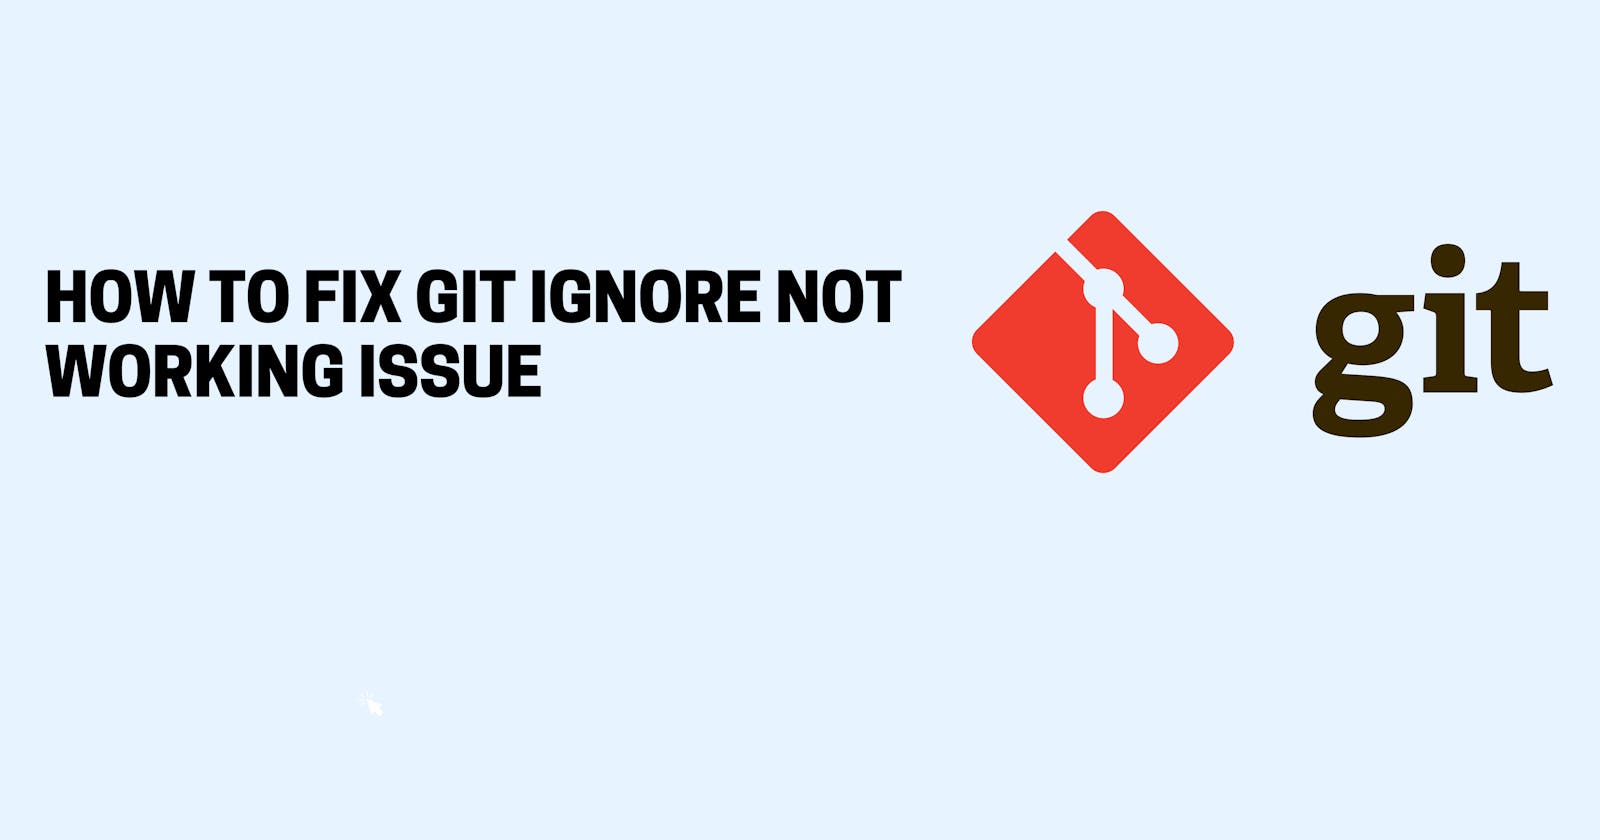 How To Fix Git Ignore Not Working Issue